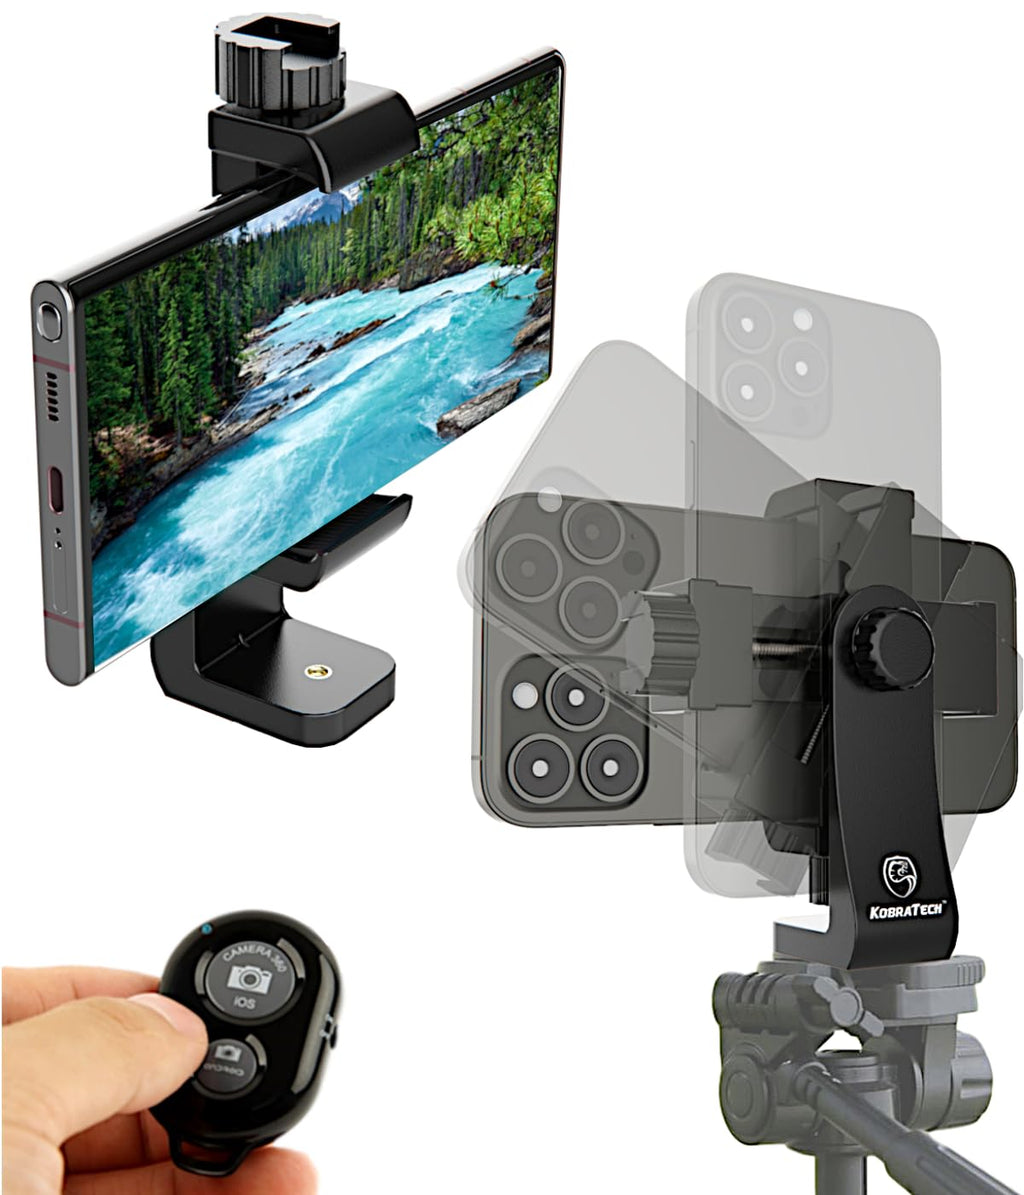 Cell Phone Tripod Mount | Fits Any Smartphone | Includes Bluetooth Remote Shutter | UniMount 360 iPhone Tripod Mount Adapter Black